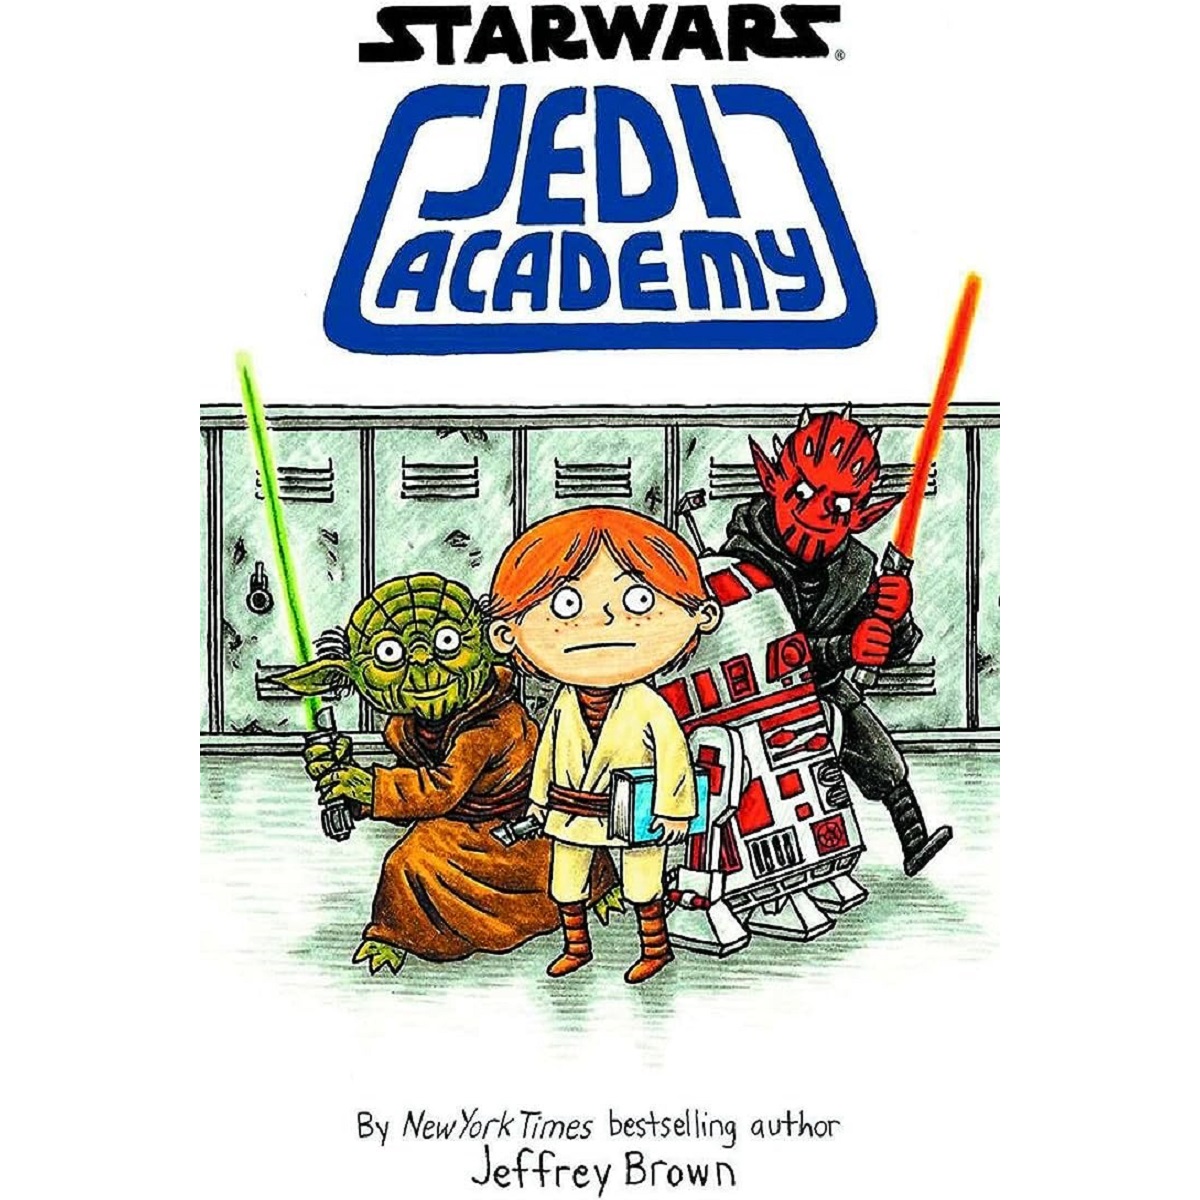 https://tarbiyahbooksplus.com/shop/islamic-books-and-products-for-children/star-wars-jedi-academy/